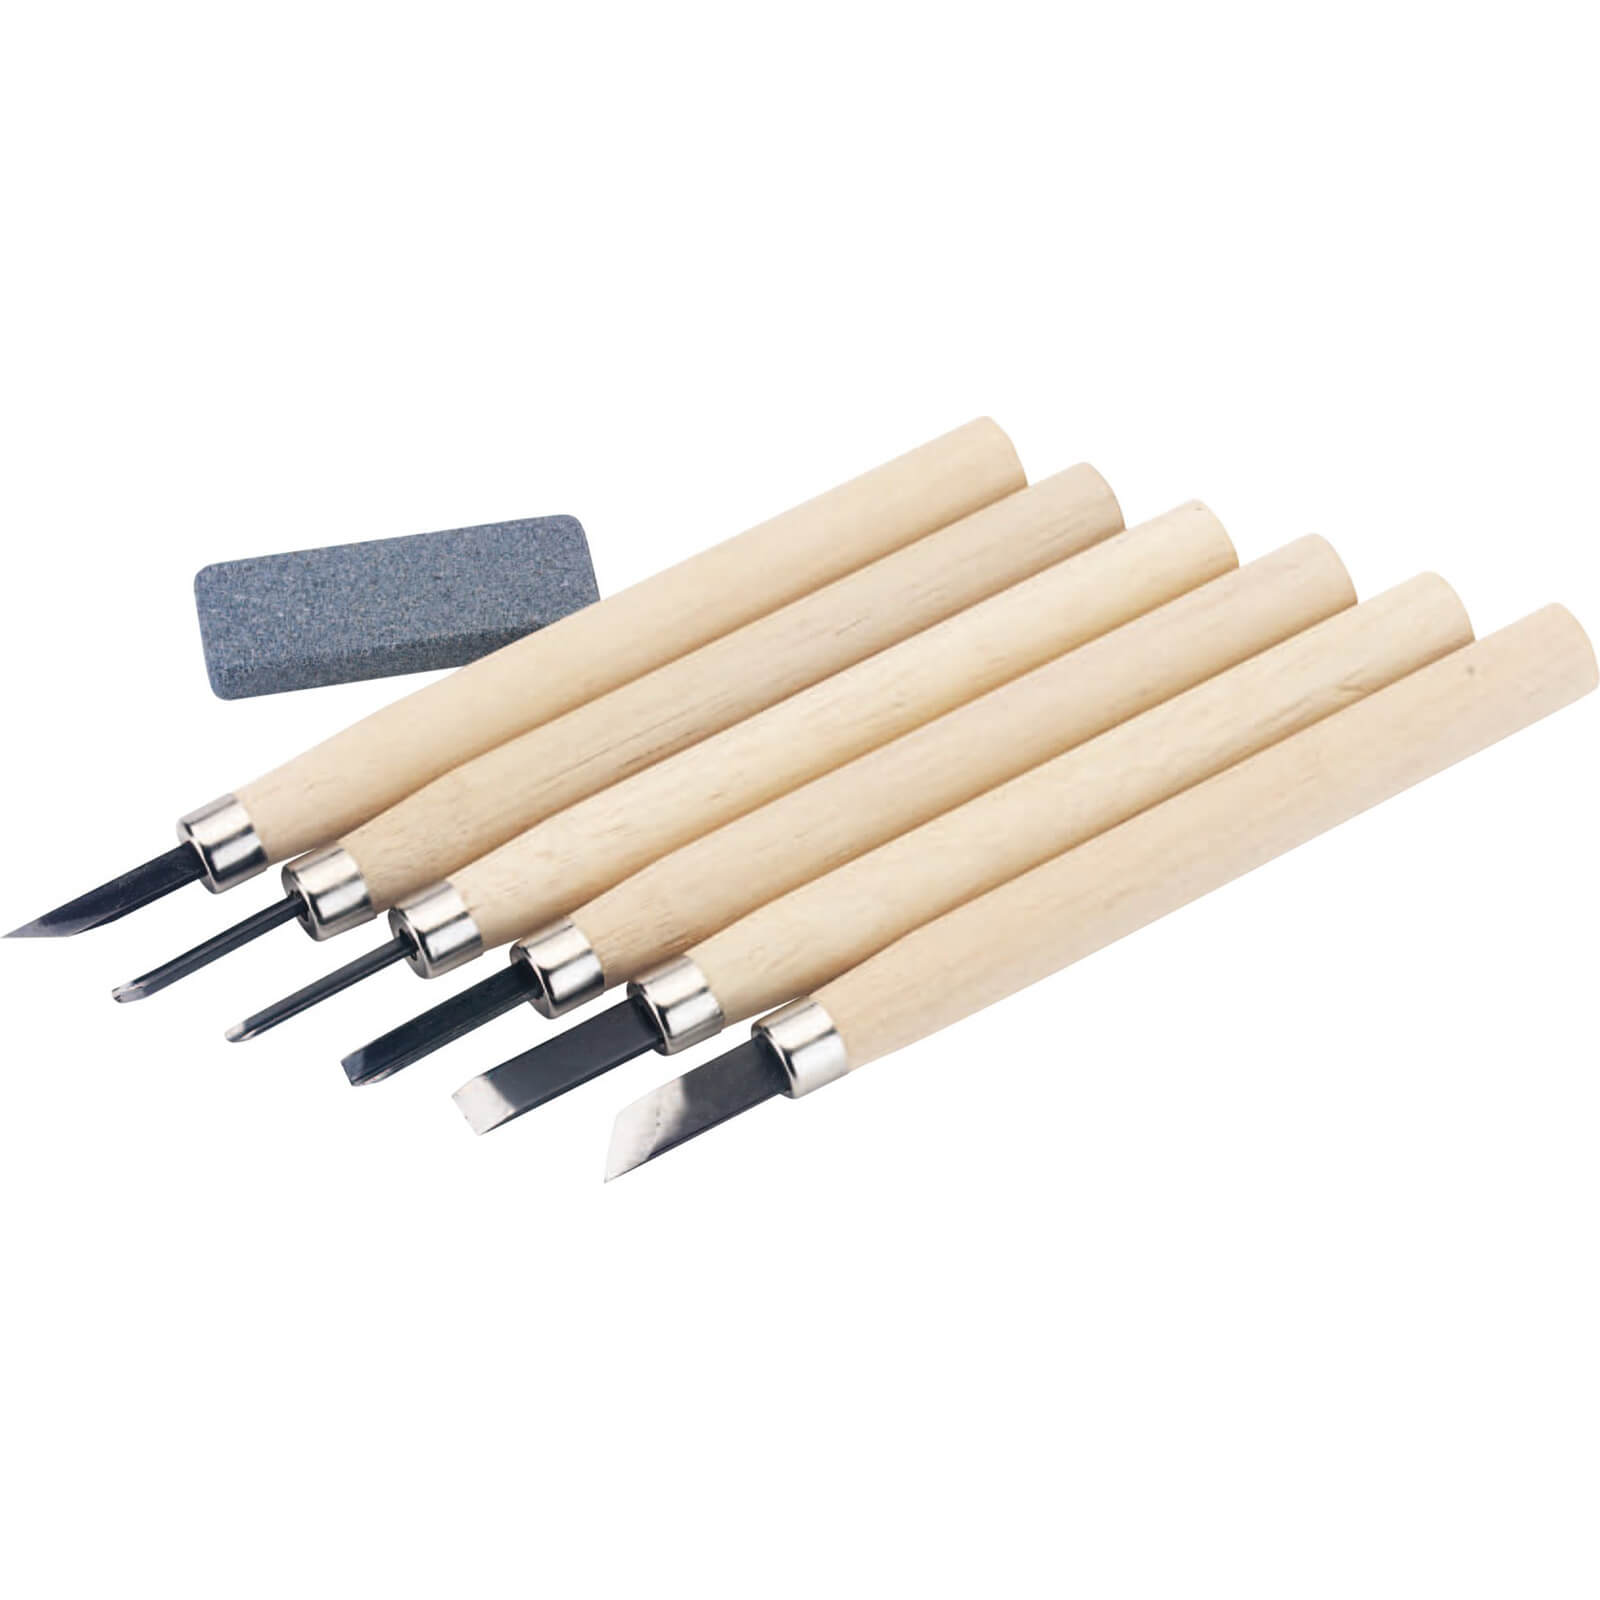 Photo of Draper 7 Piece Wood Carving Gouge And Chisel Set